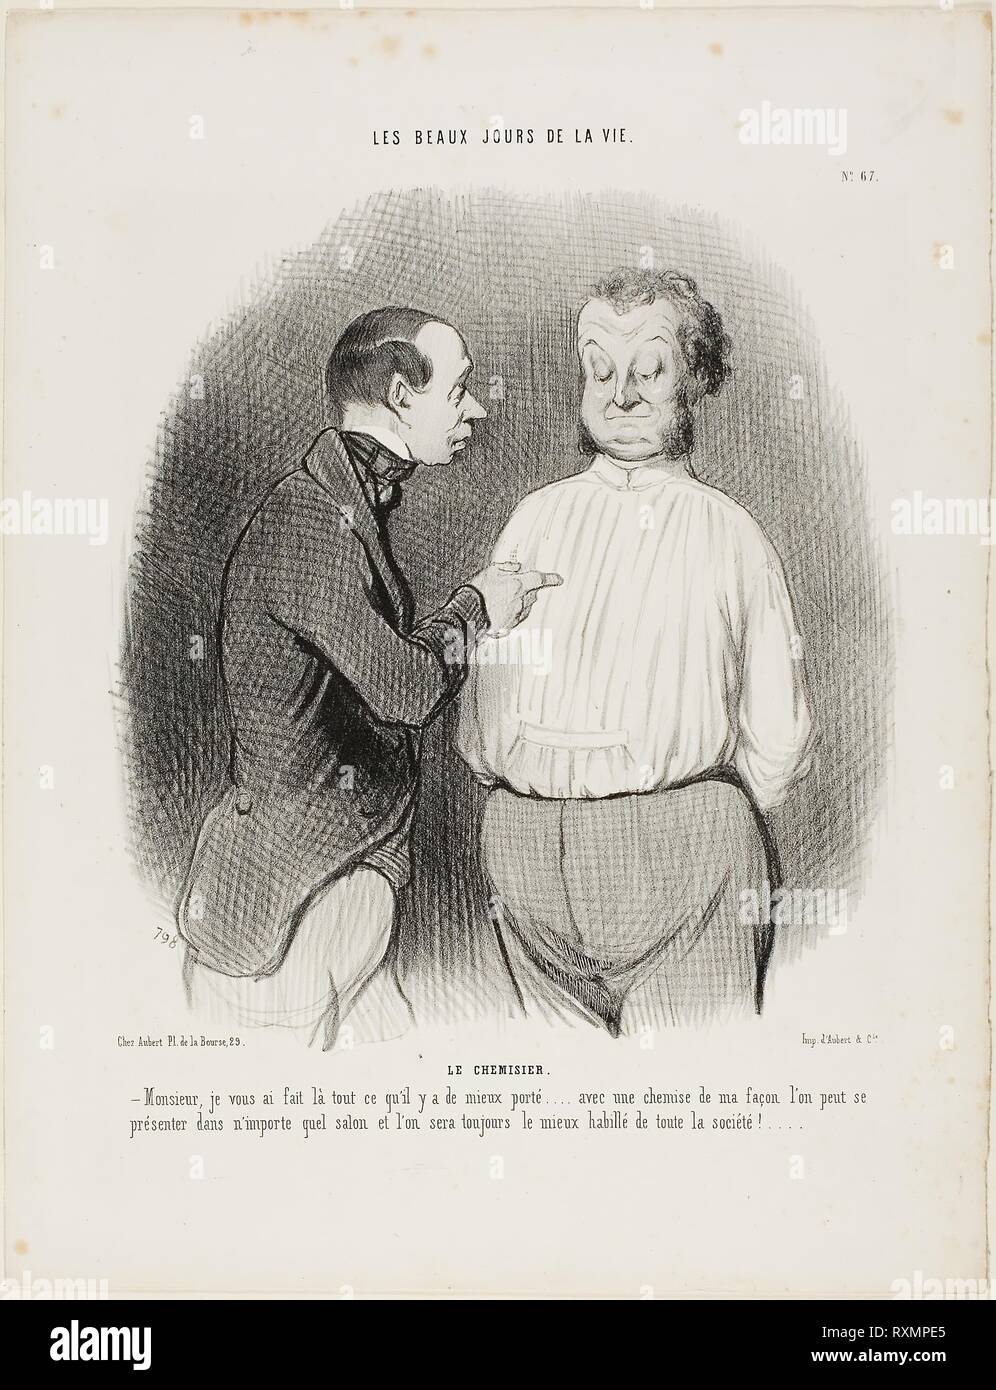 The Shirt Maker. 'Sir, I have tailored here for you the best that is presently available..... with a shirt of my making one can present oneself in no matter what Salon and one will always be the best dressed man of the party,' plate 67 from Les Beaux Jours De La Vie. Honoré Victorin Daumier; French, 1808-1879. Date: 1845. Dimensions: 243 × 222 mm (image); 358 × 275 mm (sheet). Lithograph in black on white wove paper. Origin: France. Museum: The Chicago Art Institute. Author: Honoré-Victorin Daumier. Stock Photo